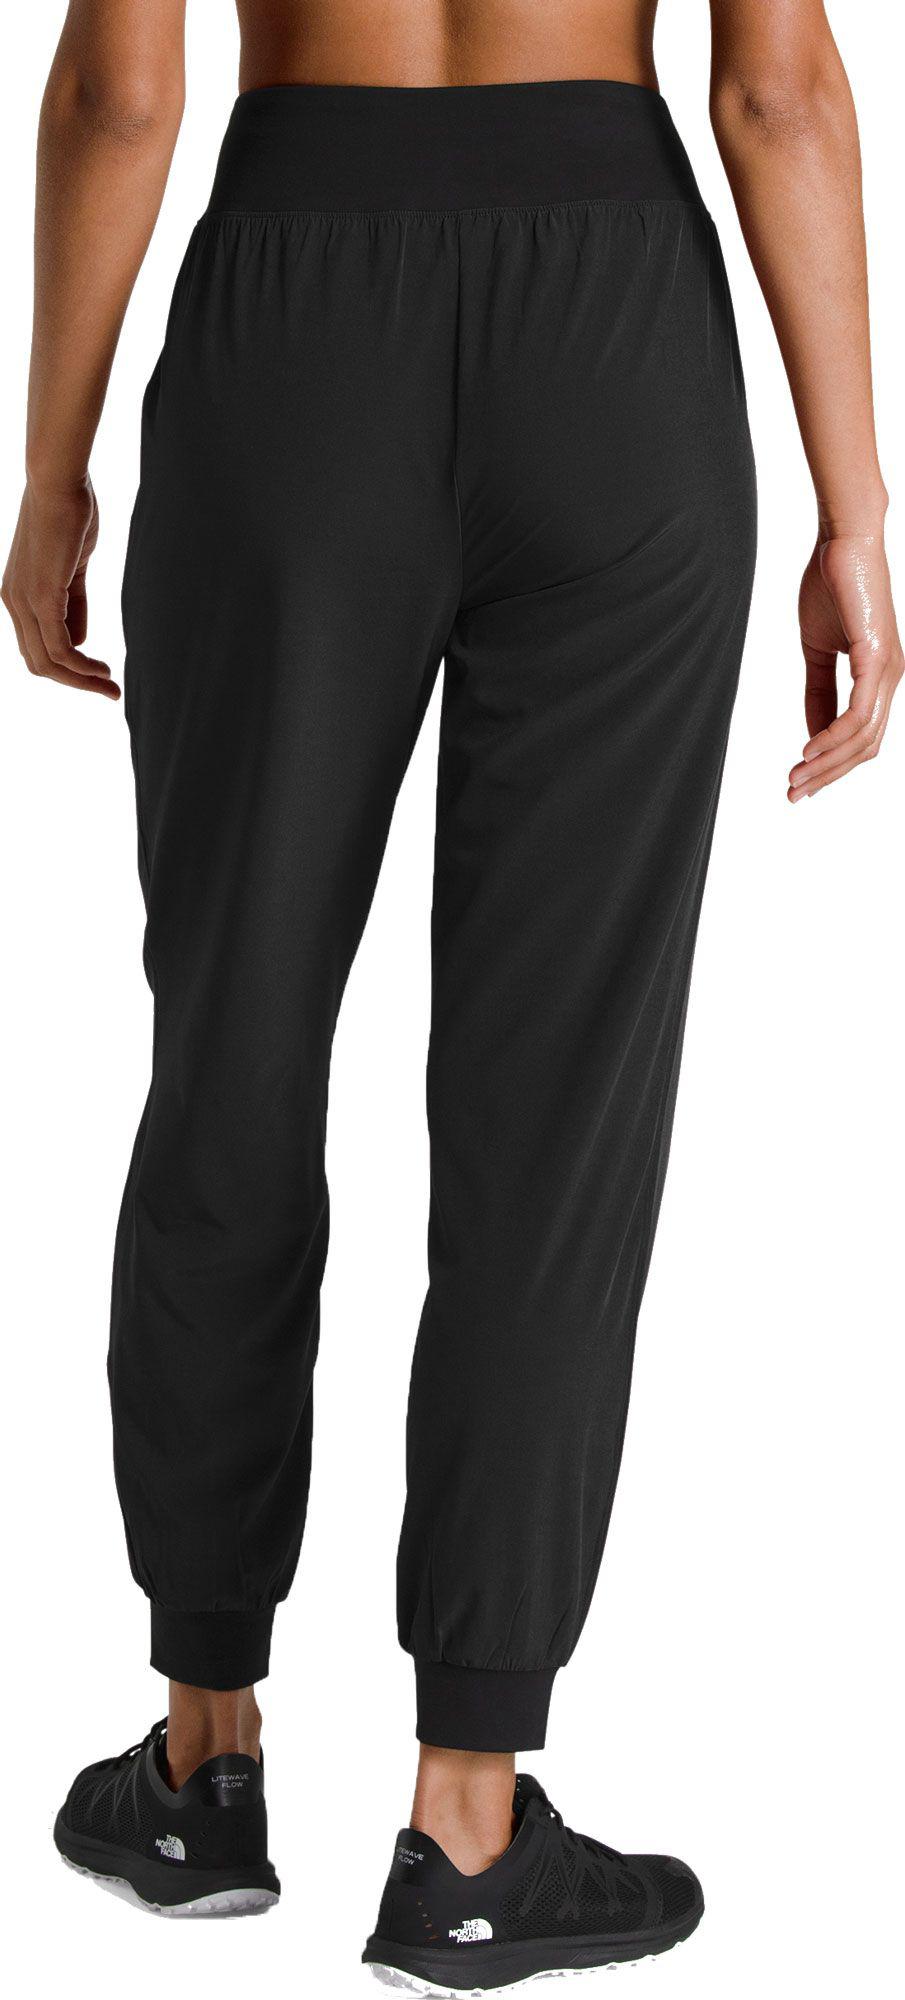 north face arise and align pants